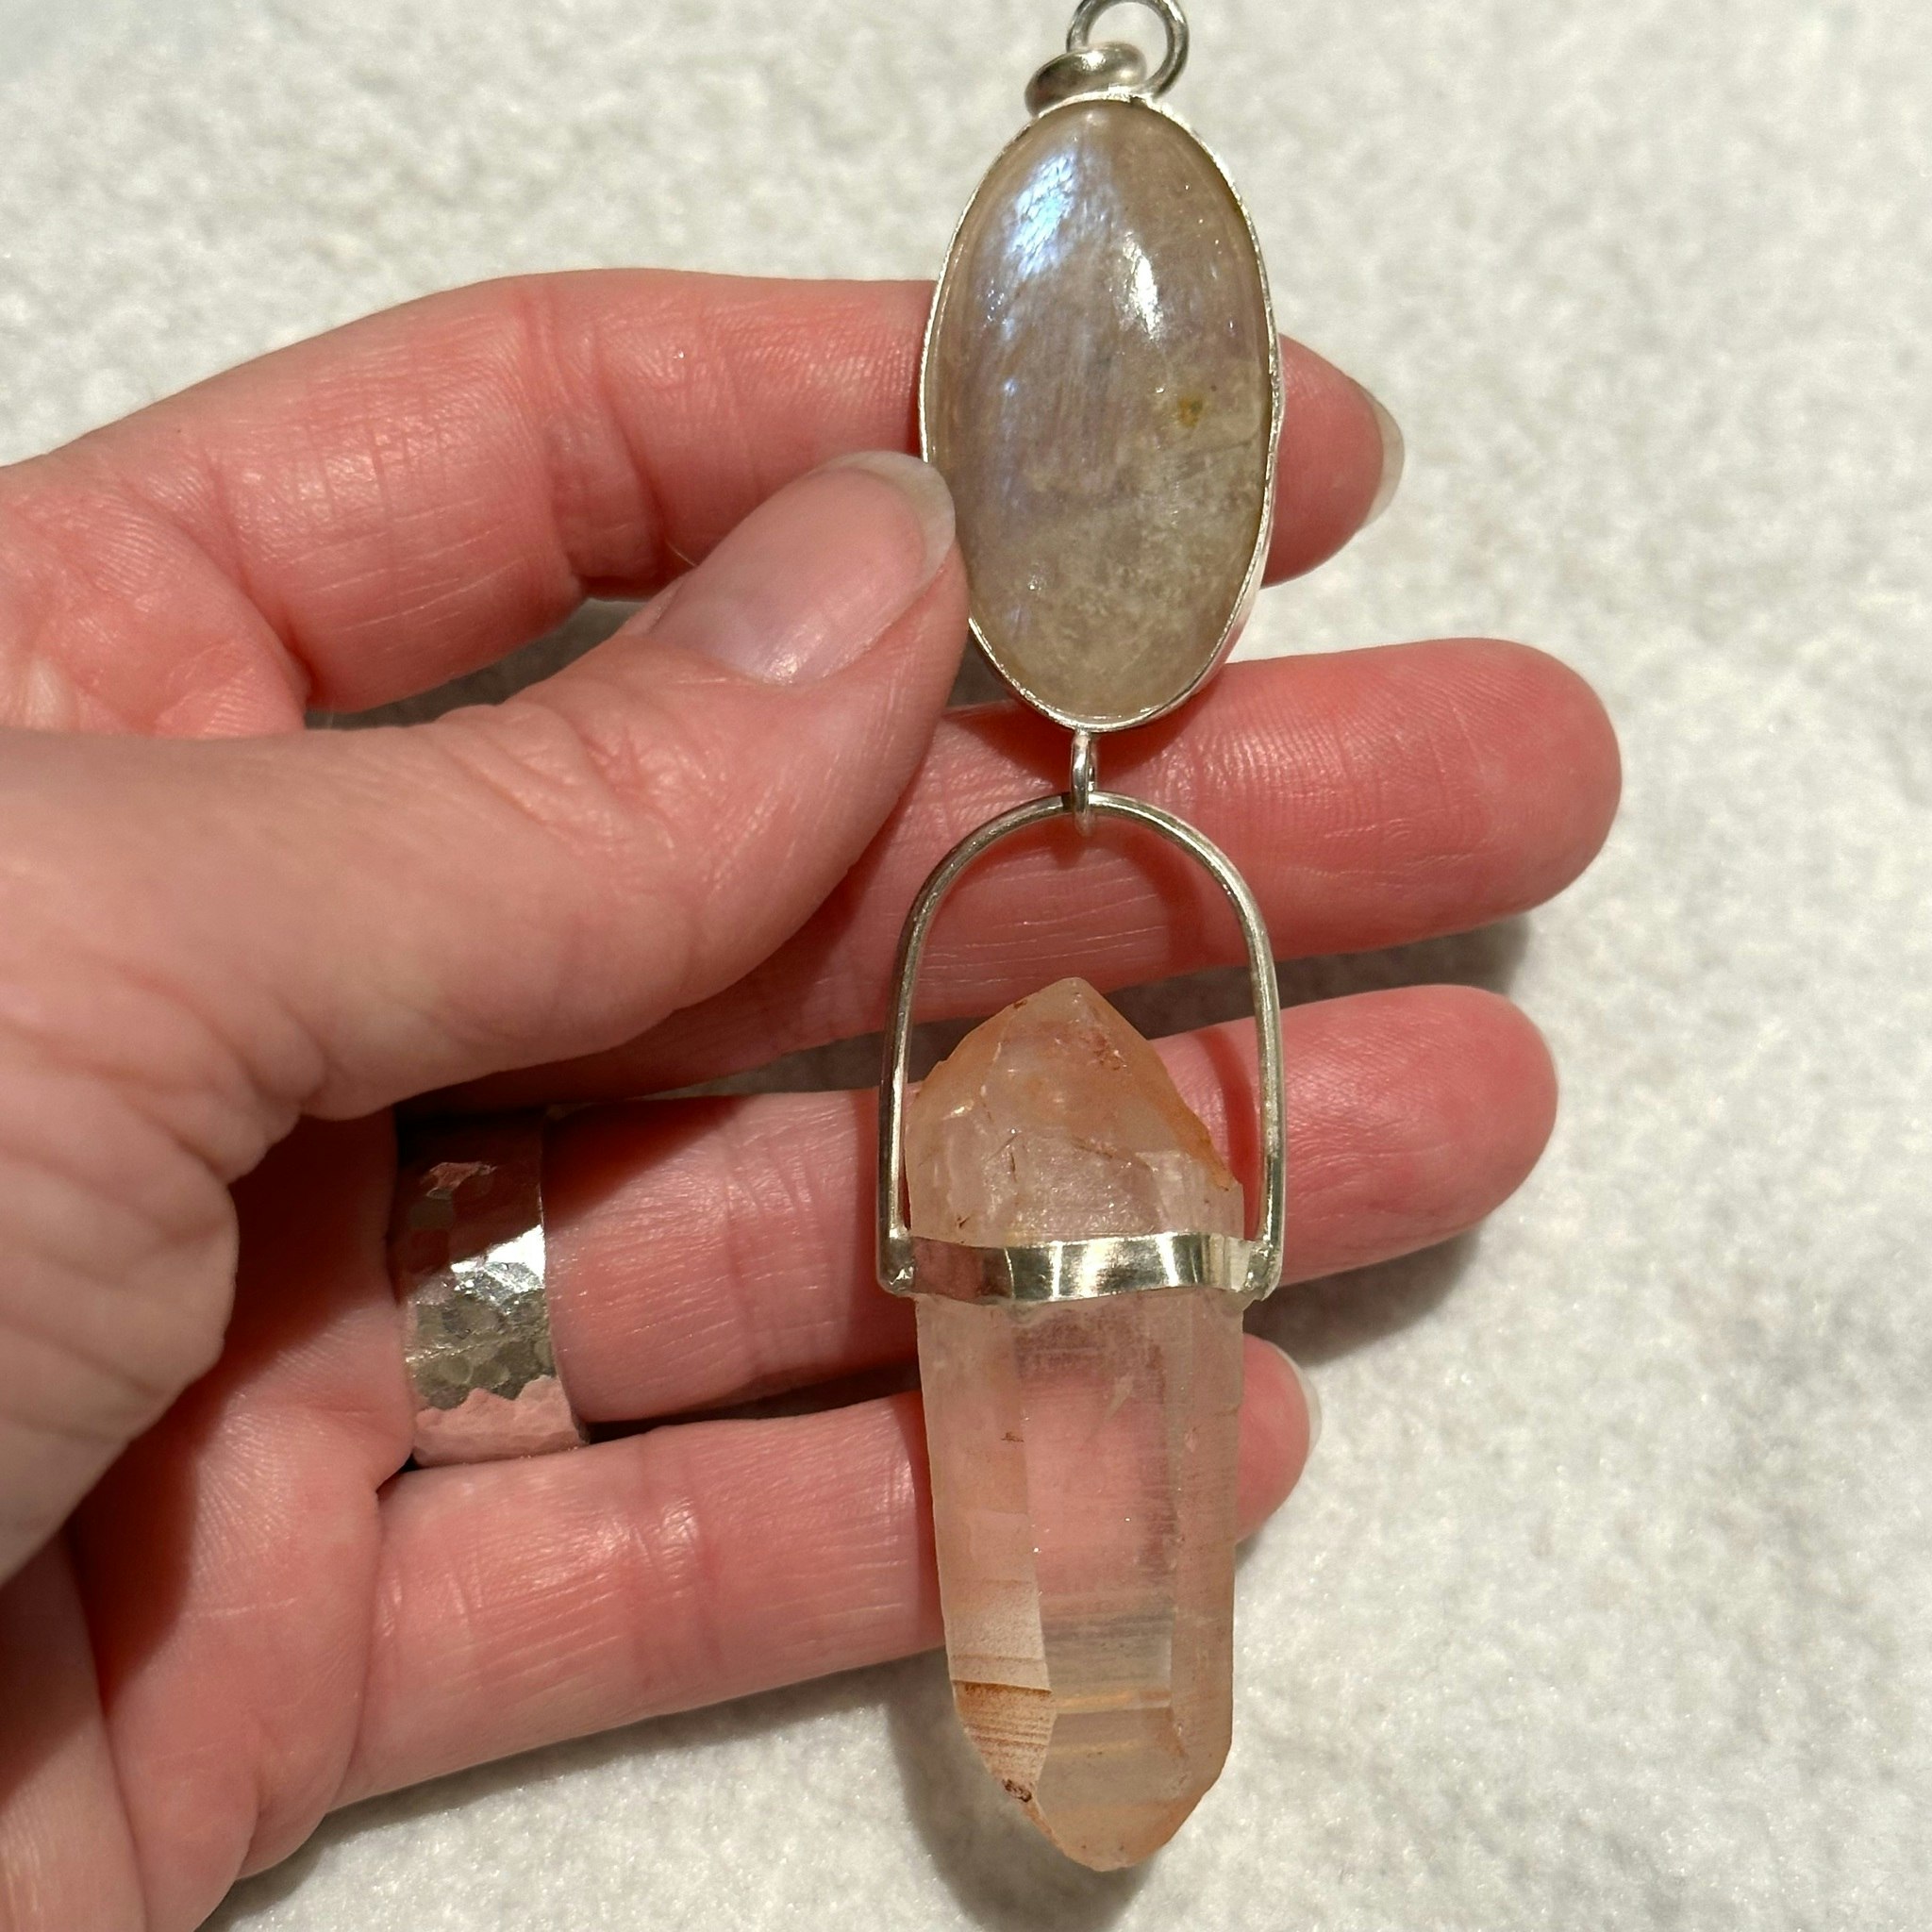 Apricot rainbow moonstone with double terminated pink lemuria